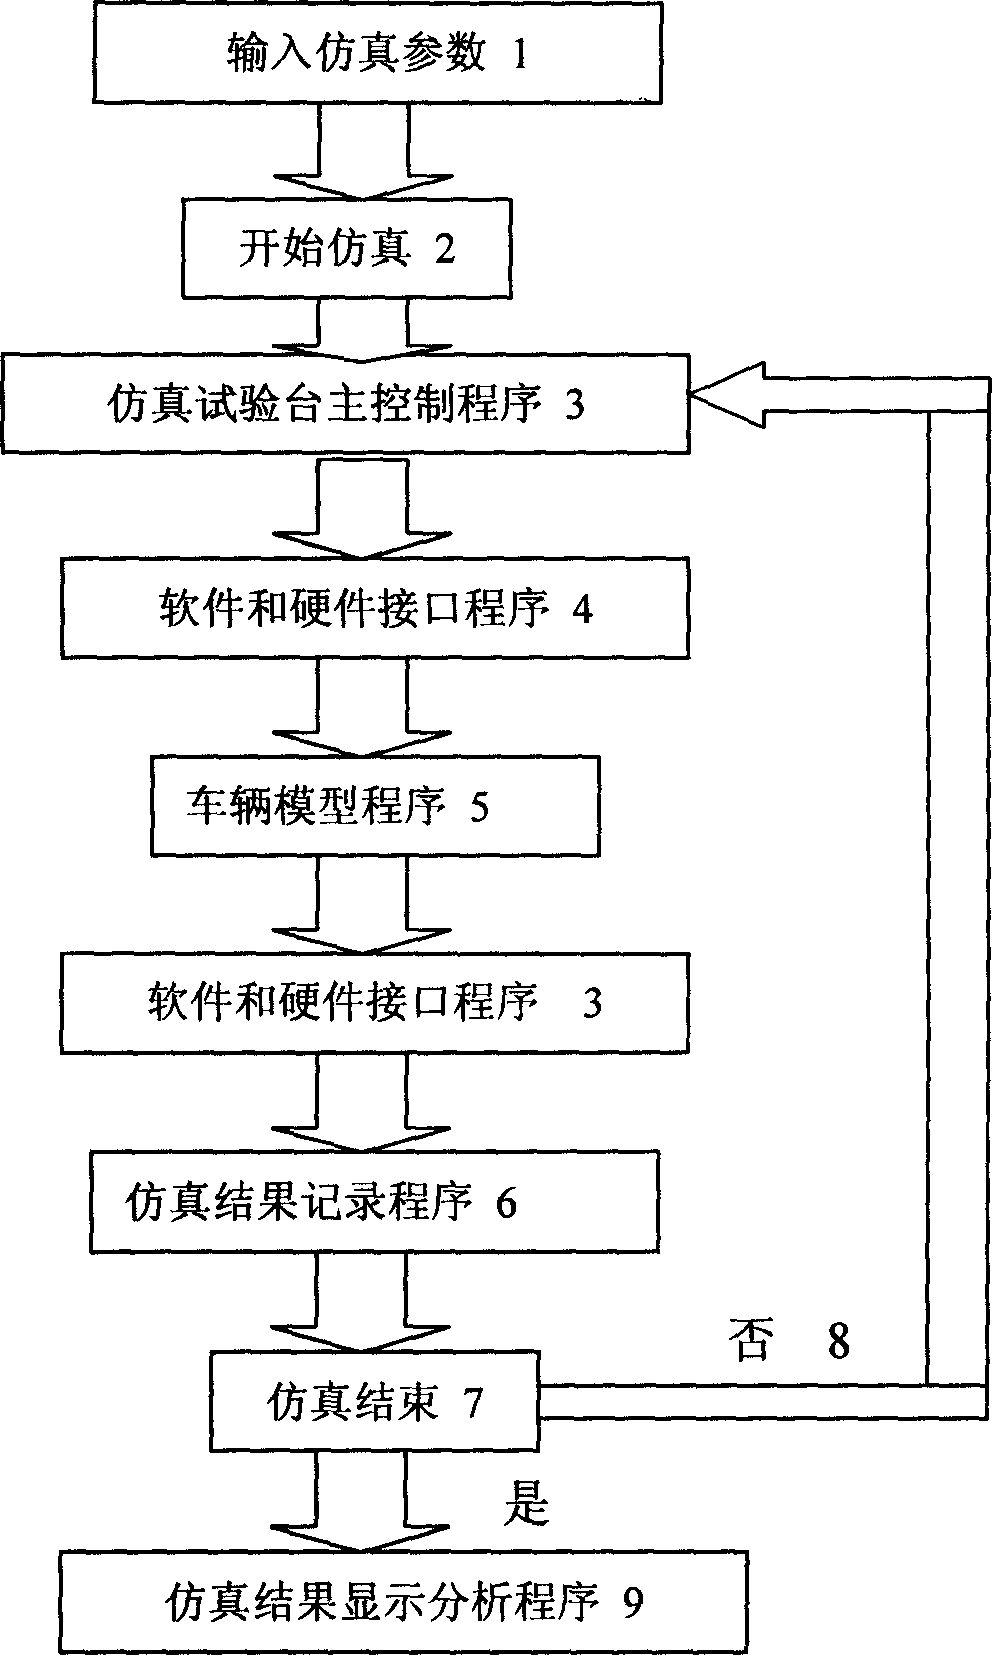 Simulative testing bench for electrical control unit of automatic transmission of automobile